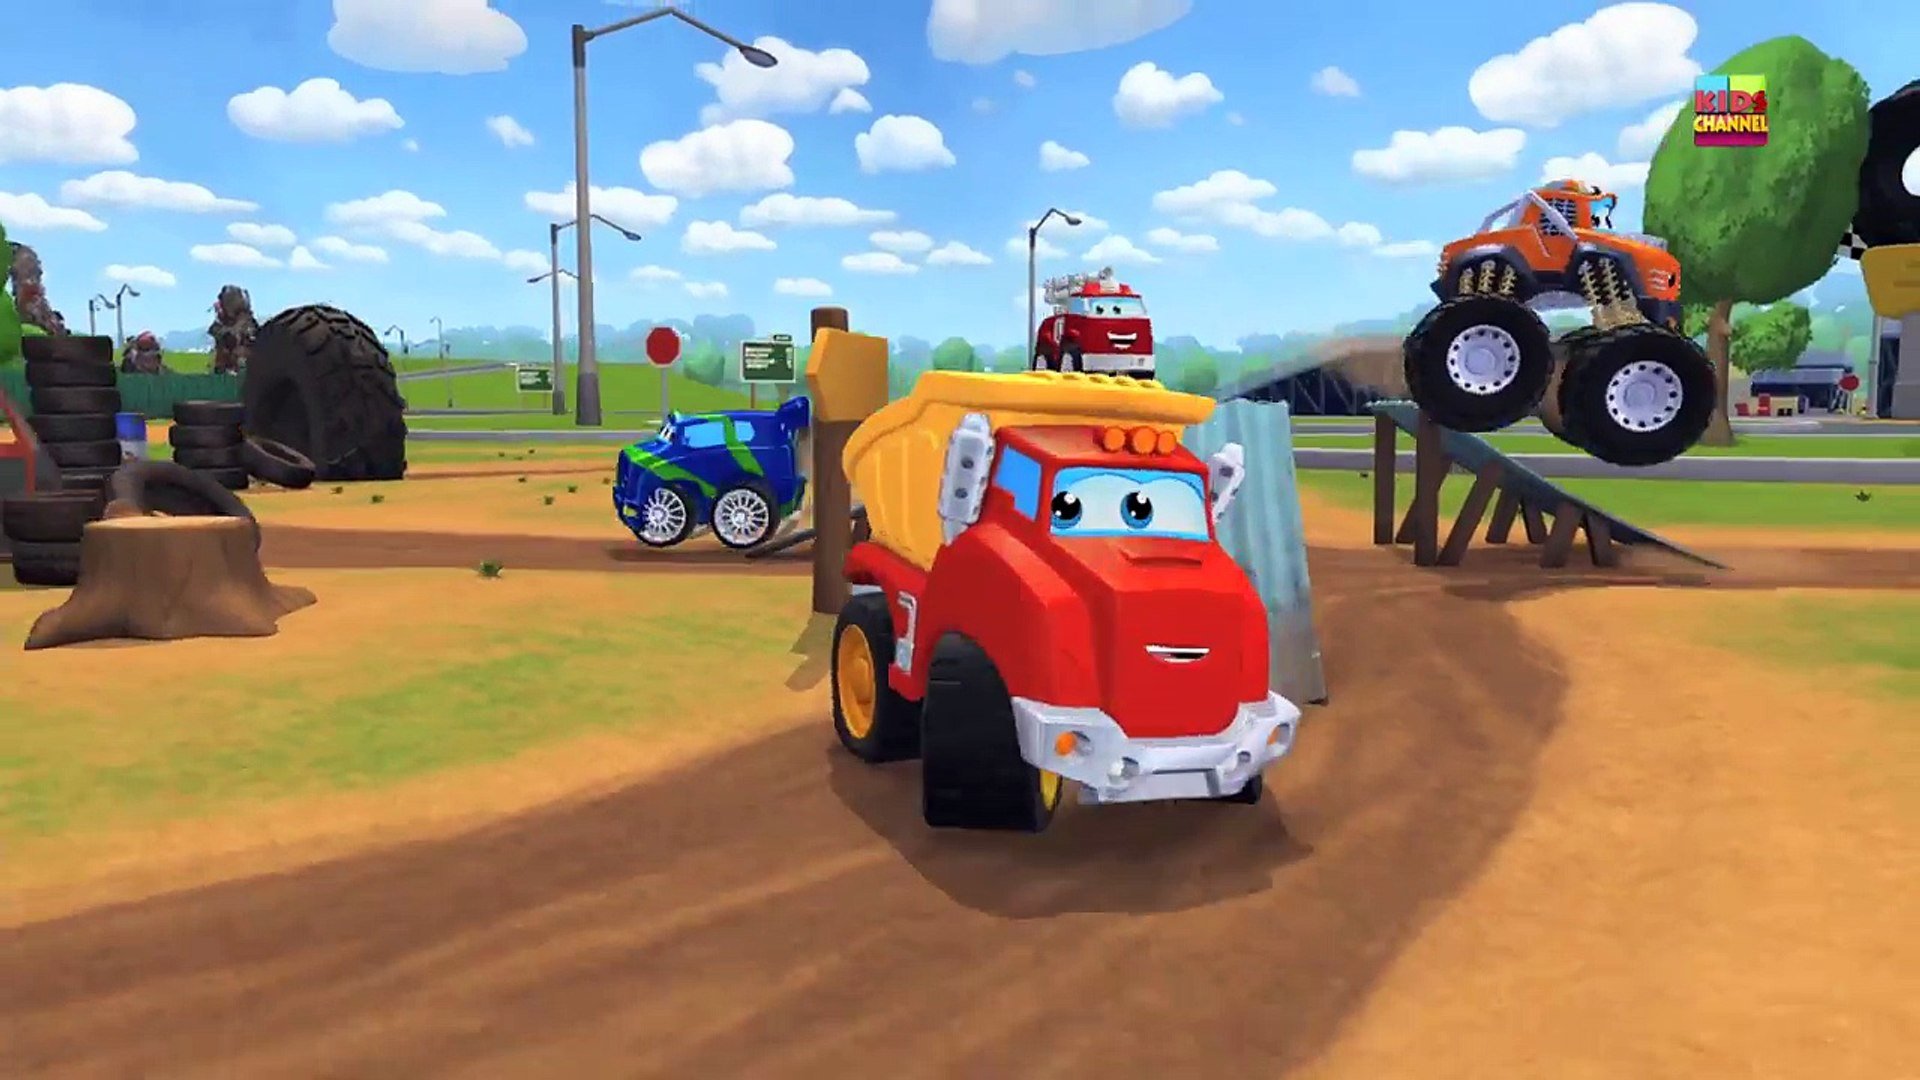 Chuck And Friends. The Checkup. Kids Videos. Truck Videos For Kids. Toy Trucks